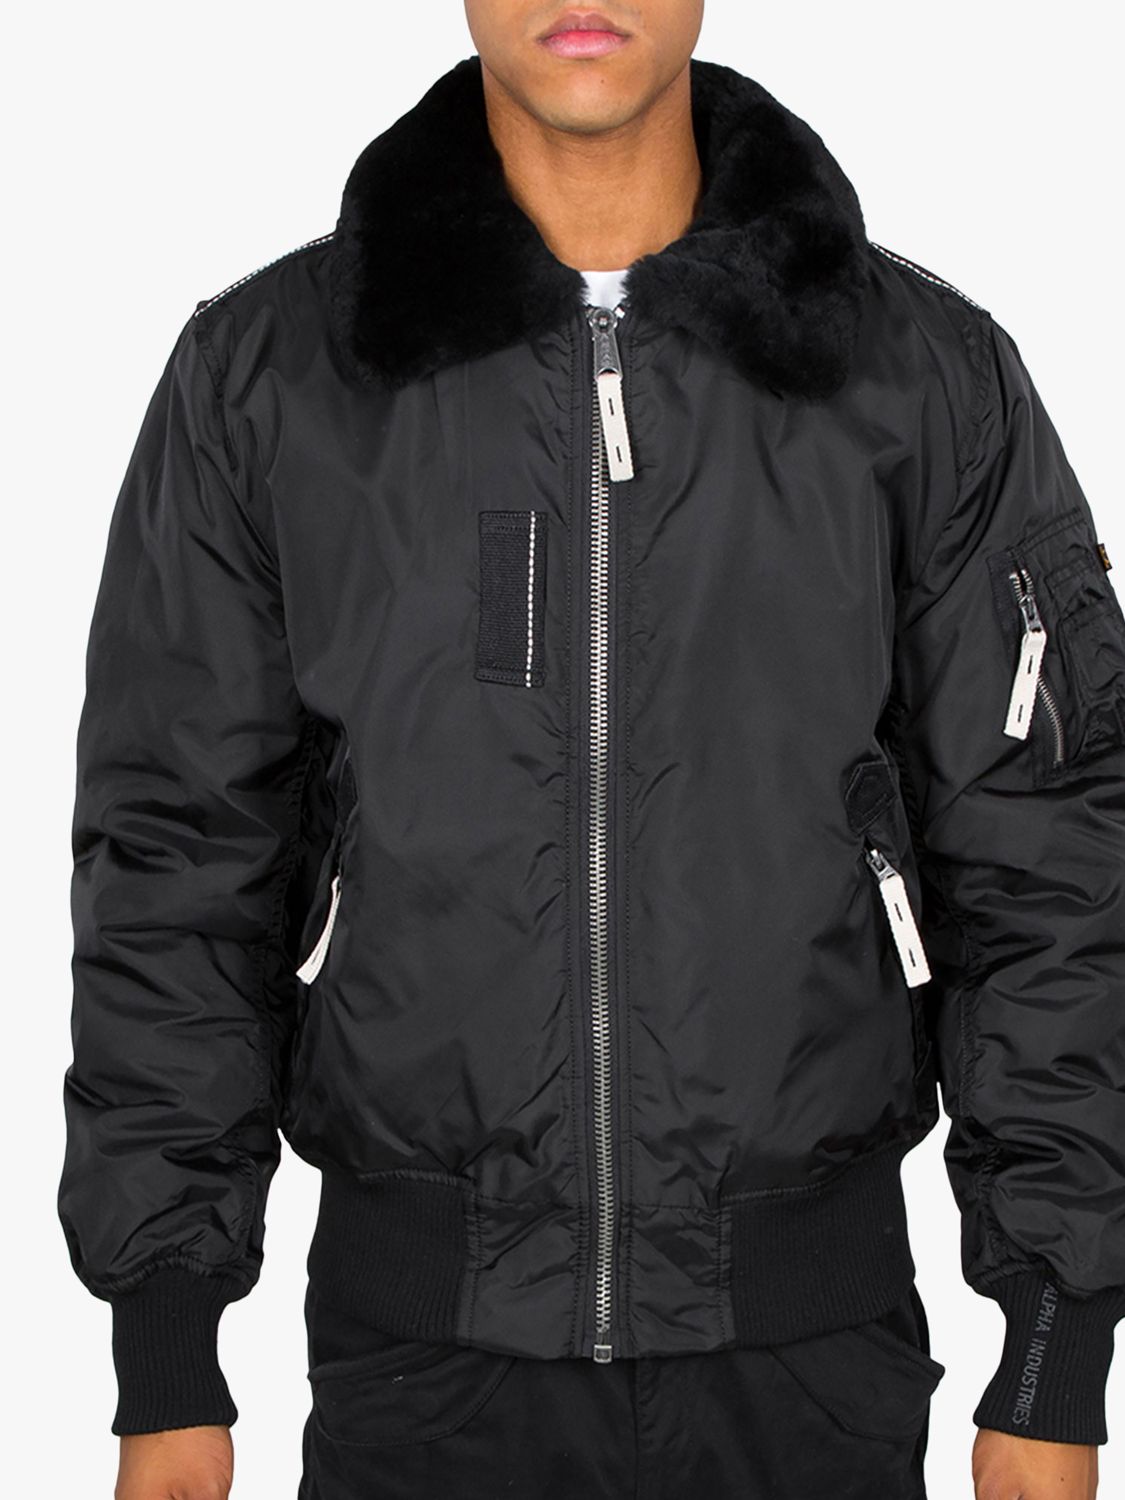 The Best Alpha Industries Jackets and Bombers for Fall and Winter